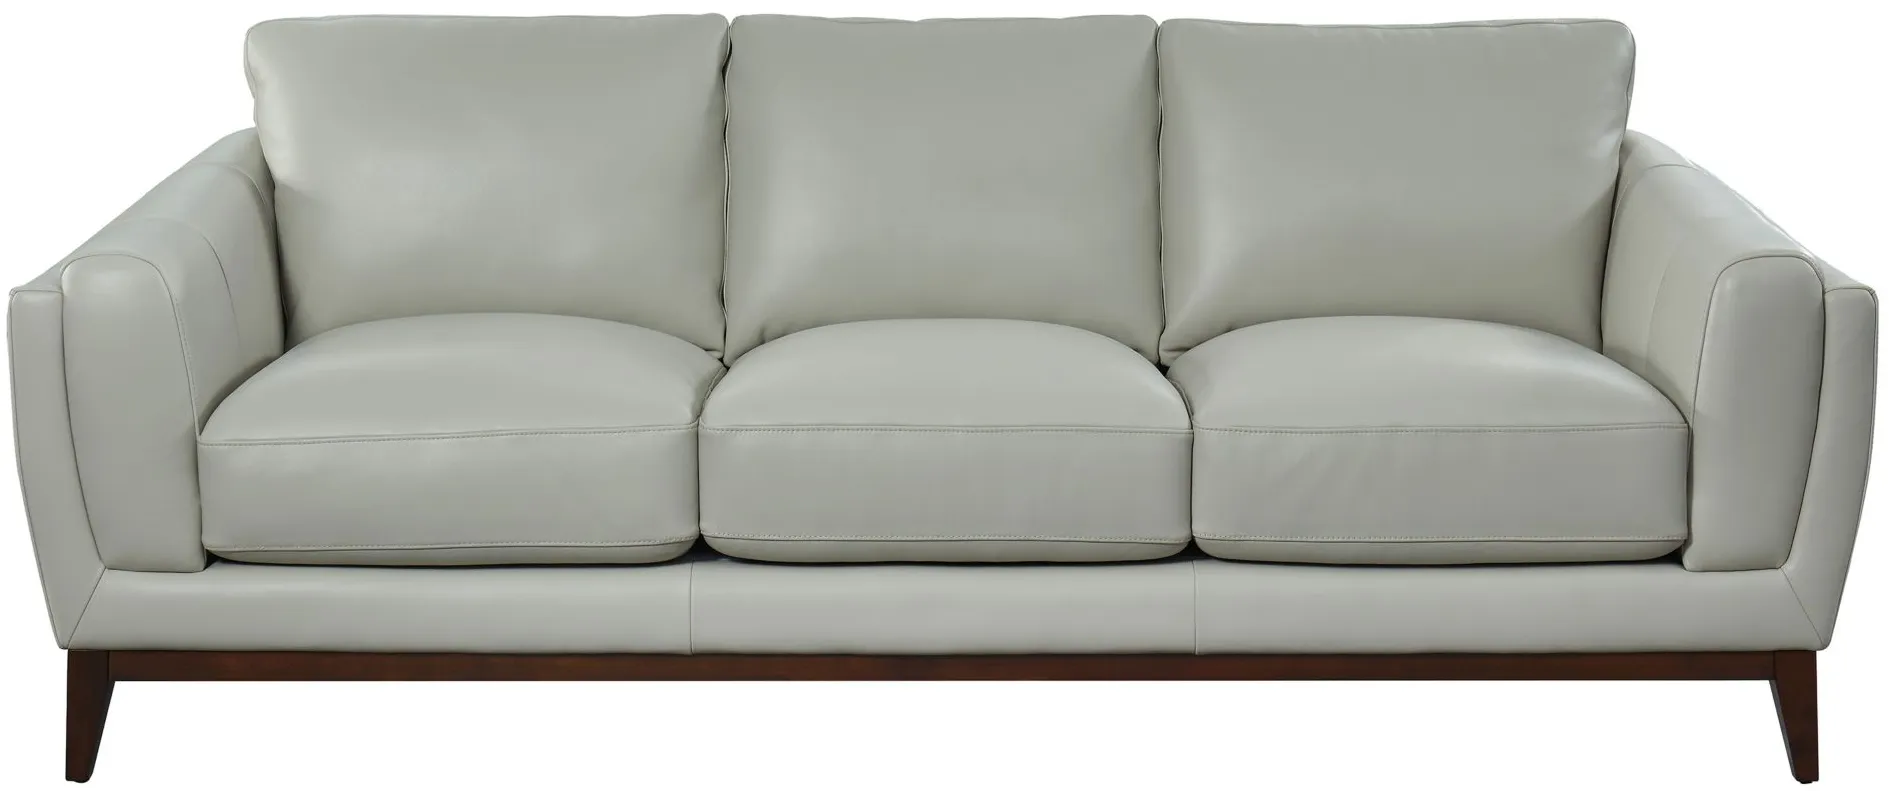 Rio Sofa in Gray;Off-White by GTR Leather Inc